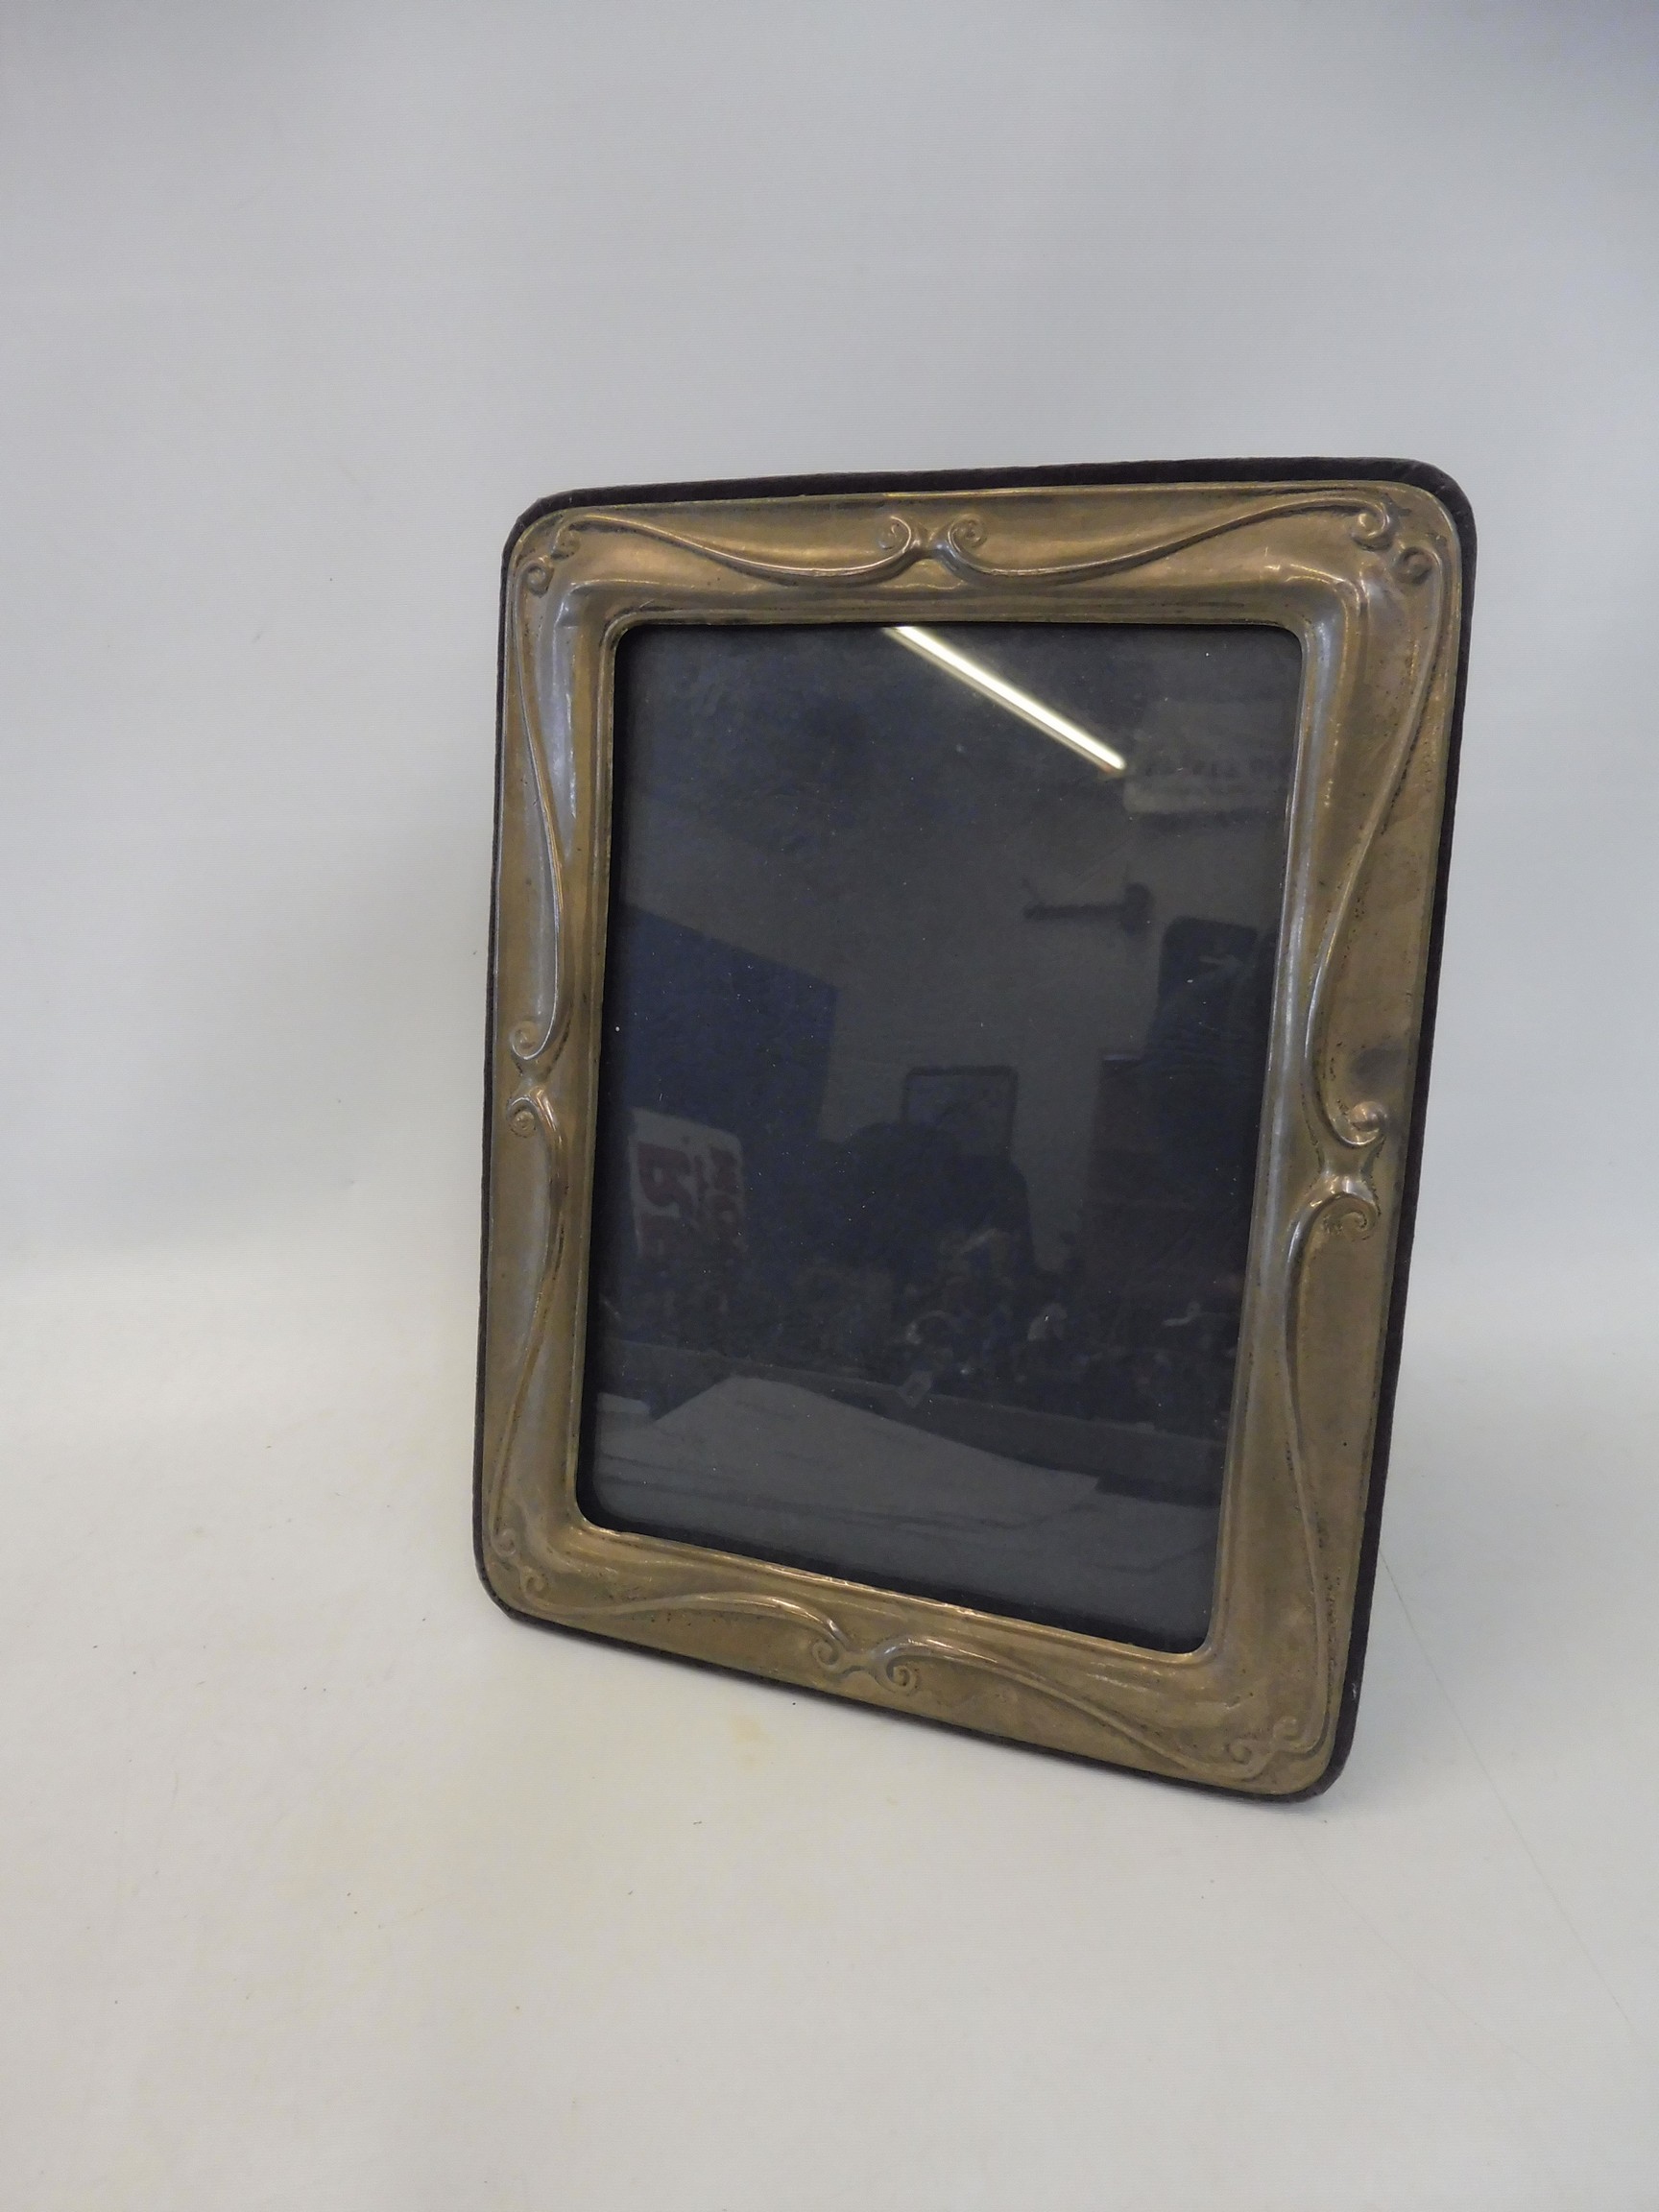 A silver photograph frame in the Art Nouveau style, maker K F Limited, London 1991.